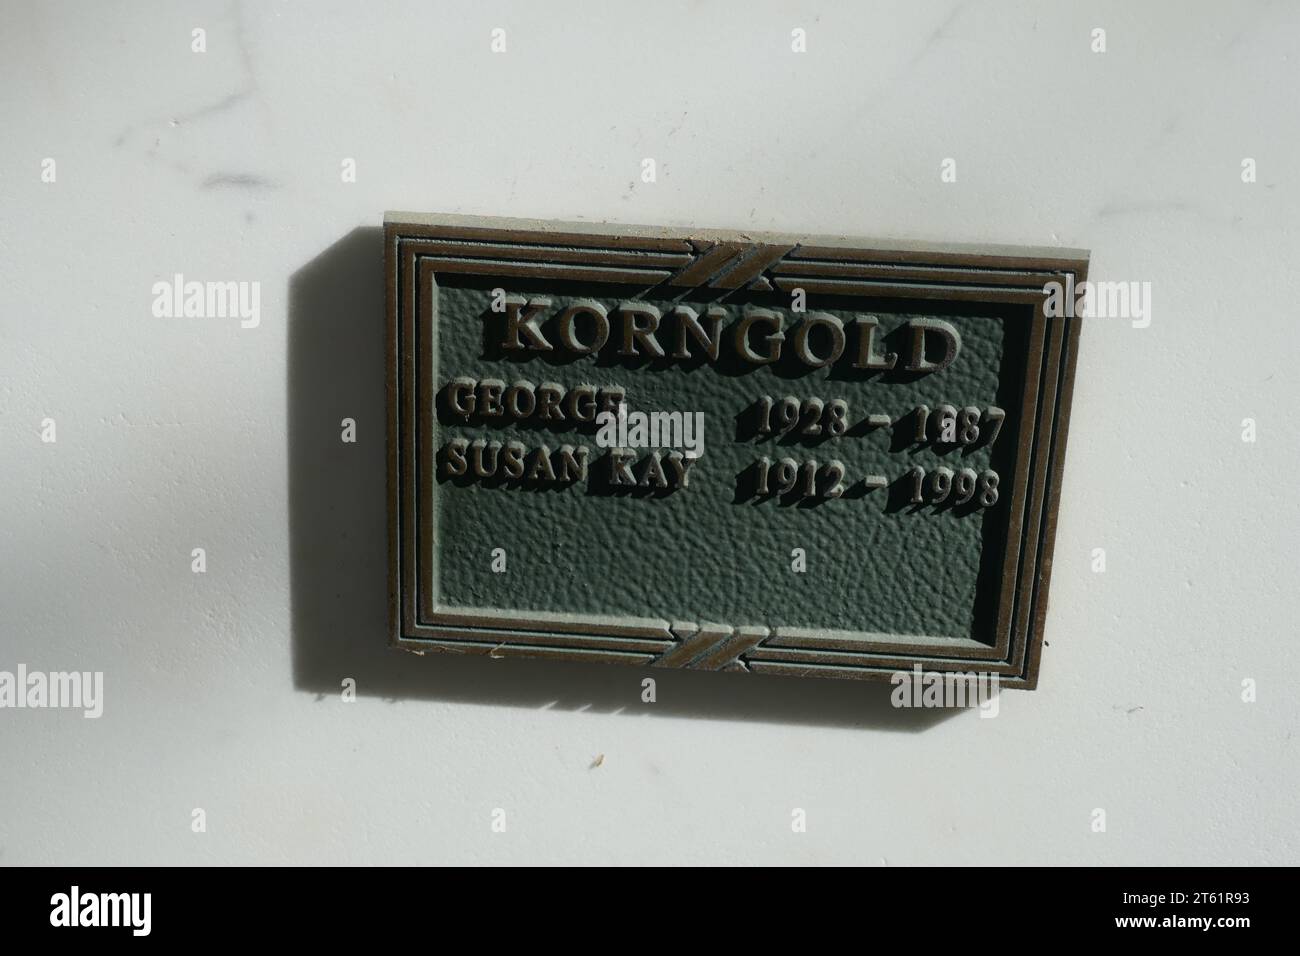 Los Angeles, California, USA 6th November 2023 Music Producer George Korngold Grave in Courts of Remembrance at Forest Lawn Memorial Park Hollywood Hills on November 6, 2023 in Los Angeles, California, USA. Photo by Barry King/Alamy Stock Photo Stock Photo